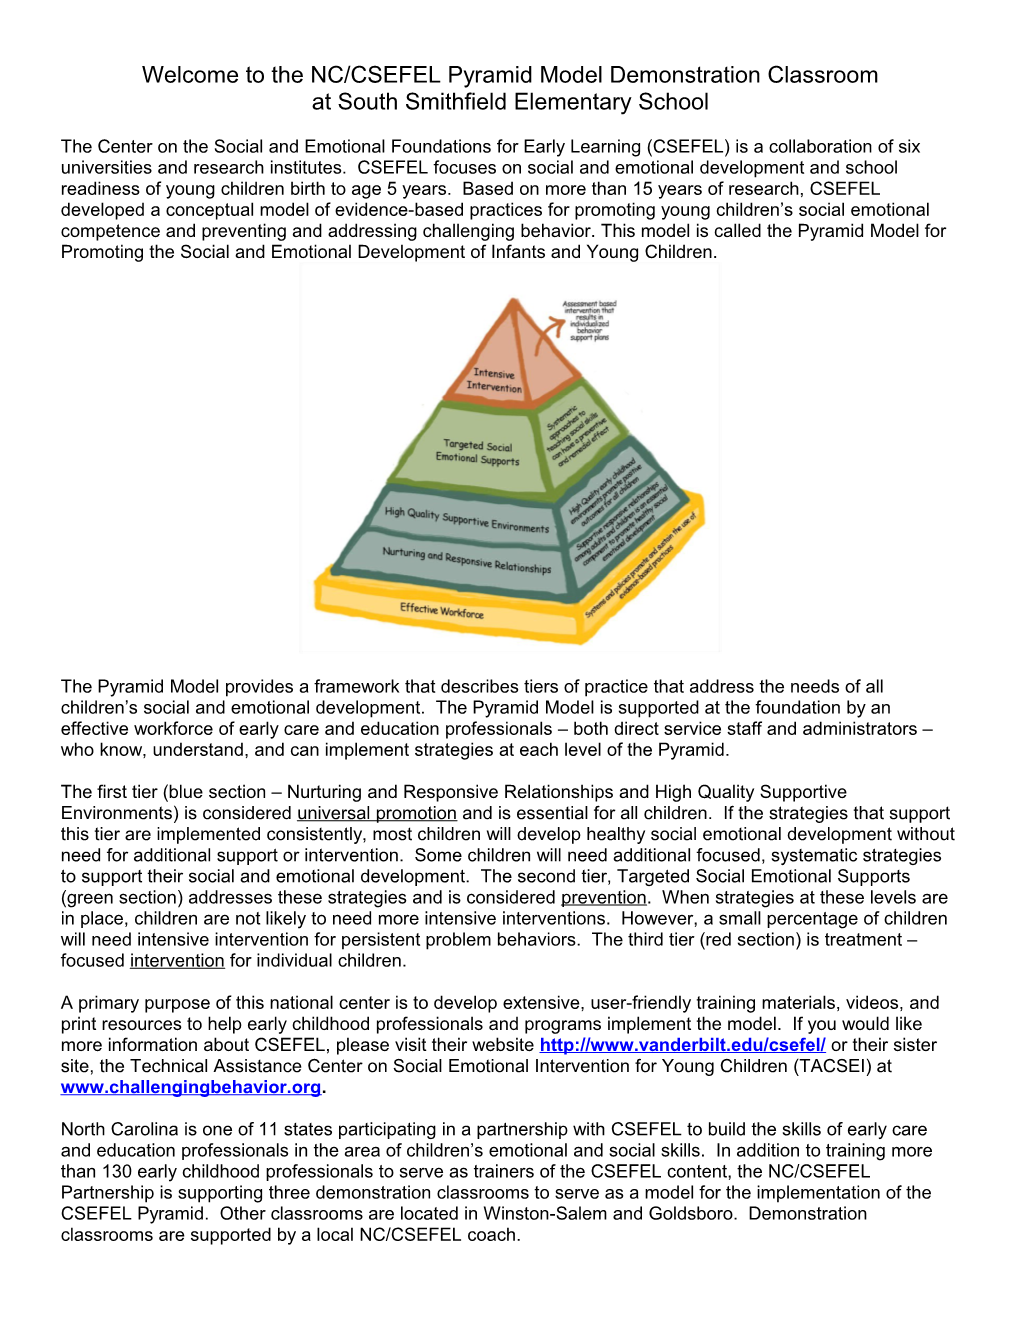 Welcome to the NC/CSEFEL Pyramid Model Demonstration Classroom